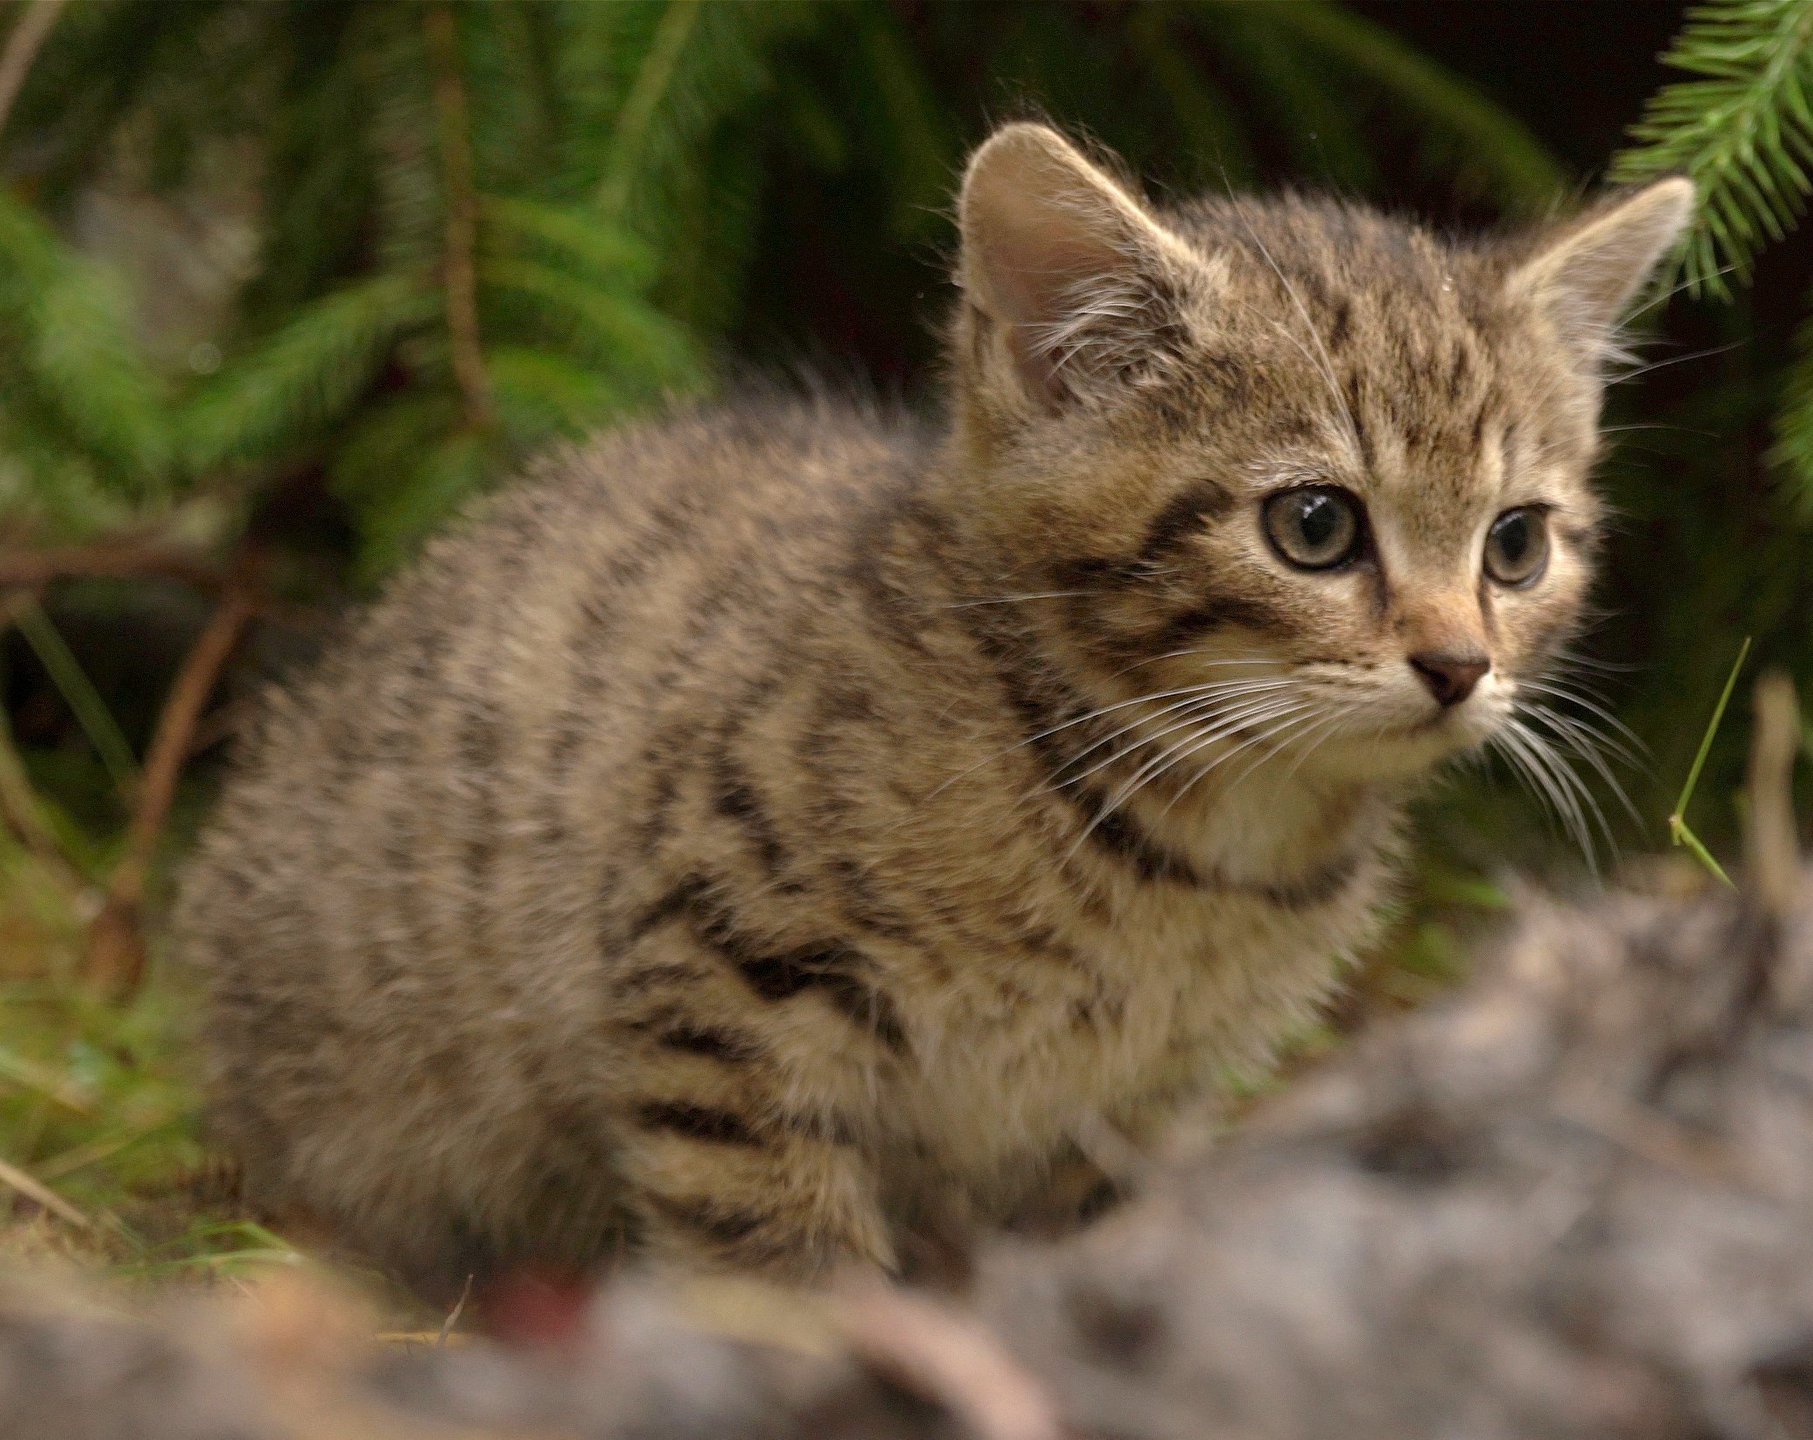 Only Hope For The Scottish Wildcat International Society For Endangered Cats Isec Canada